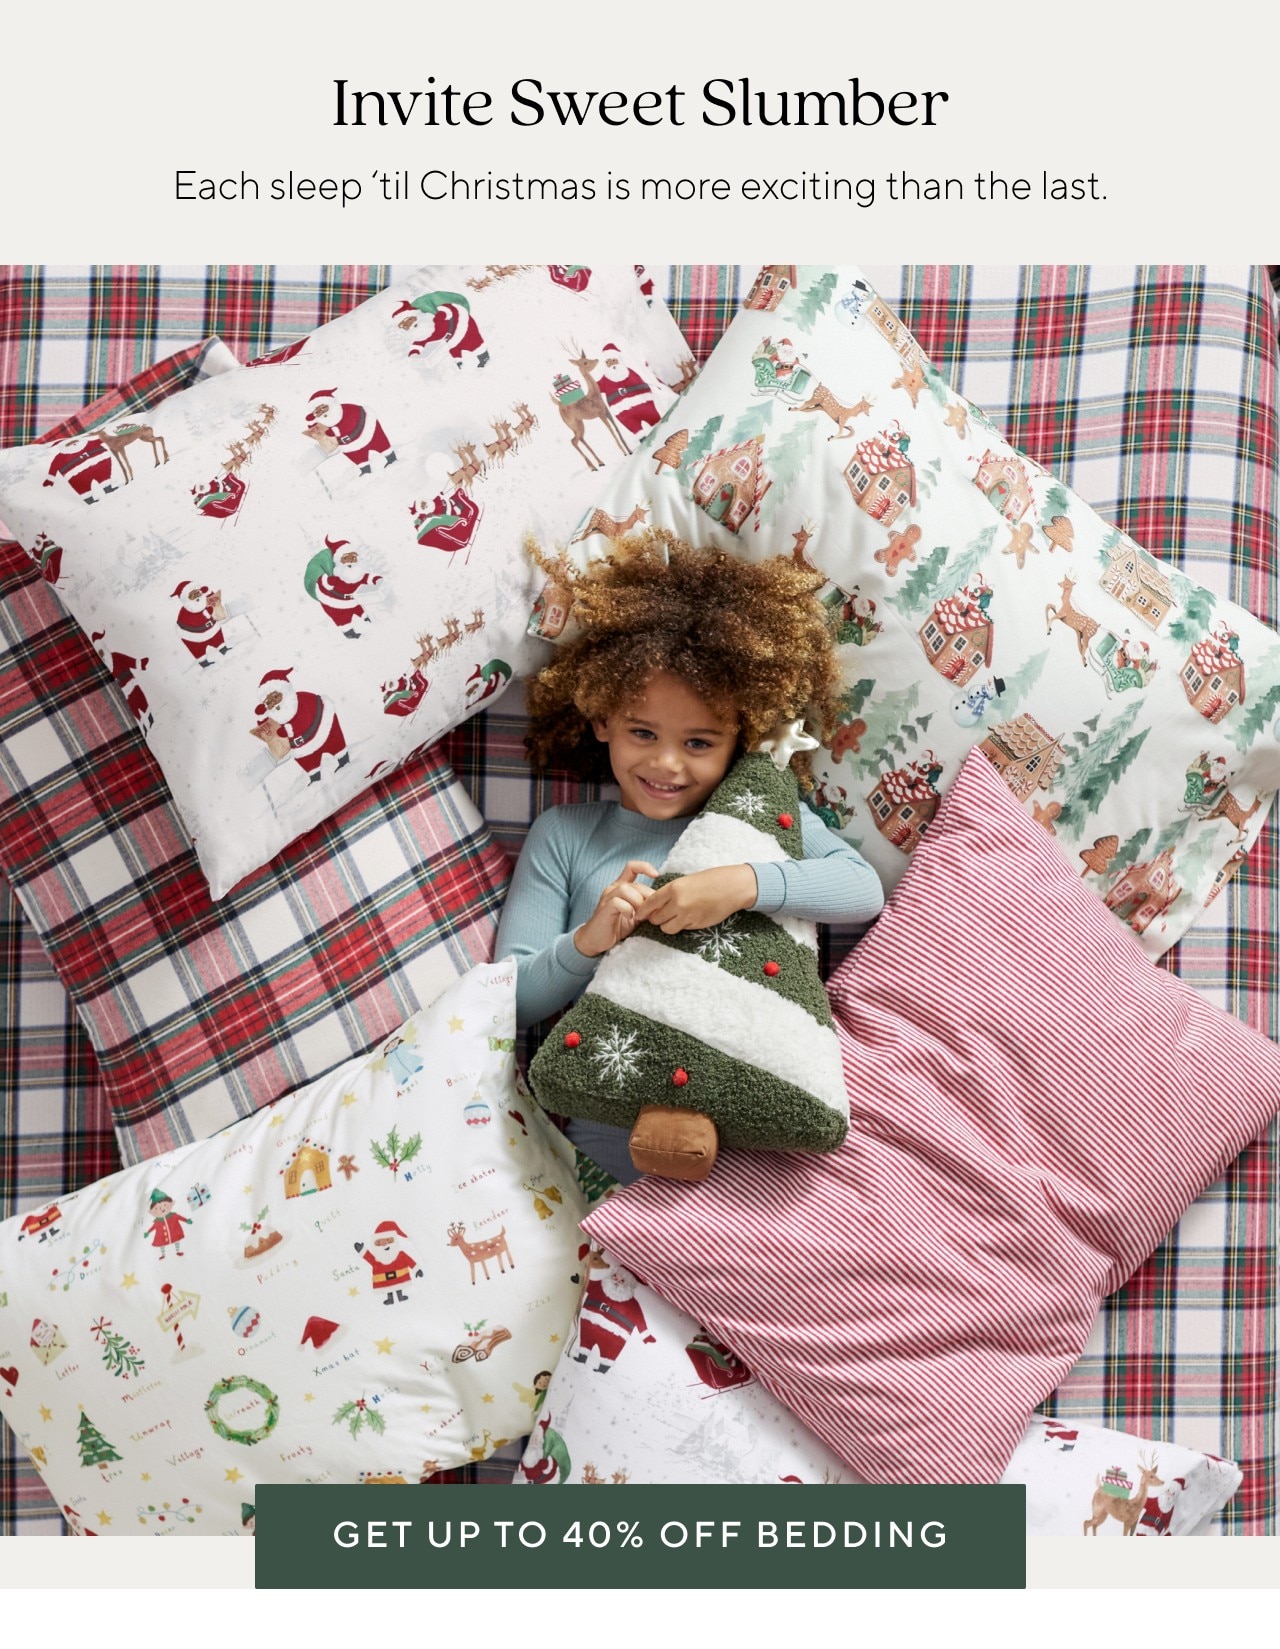 GET UP TO 40% OFF BEDDING